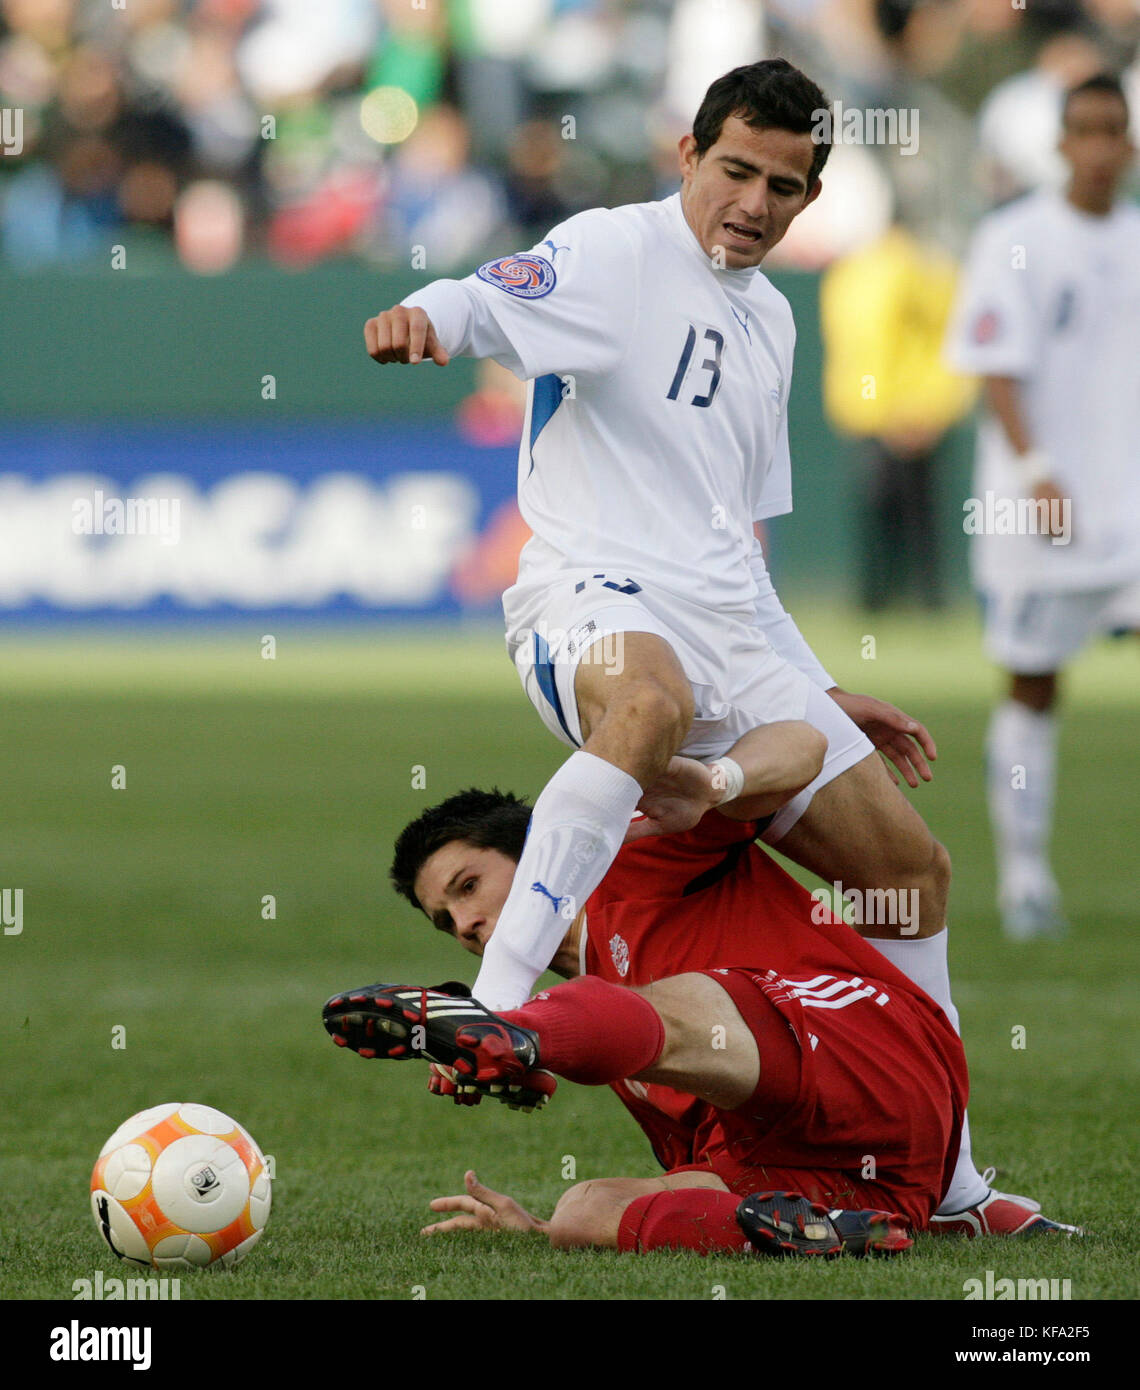 Canada's Tyler Hemming, bottom, attempts a slide tackle on